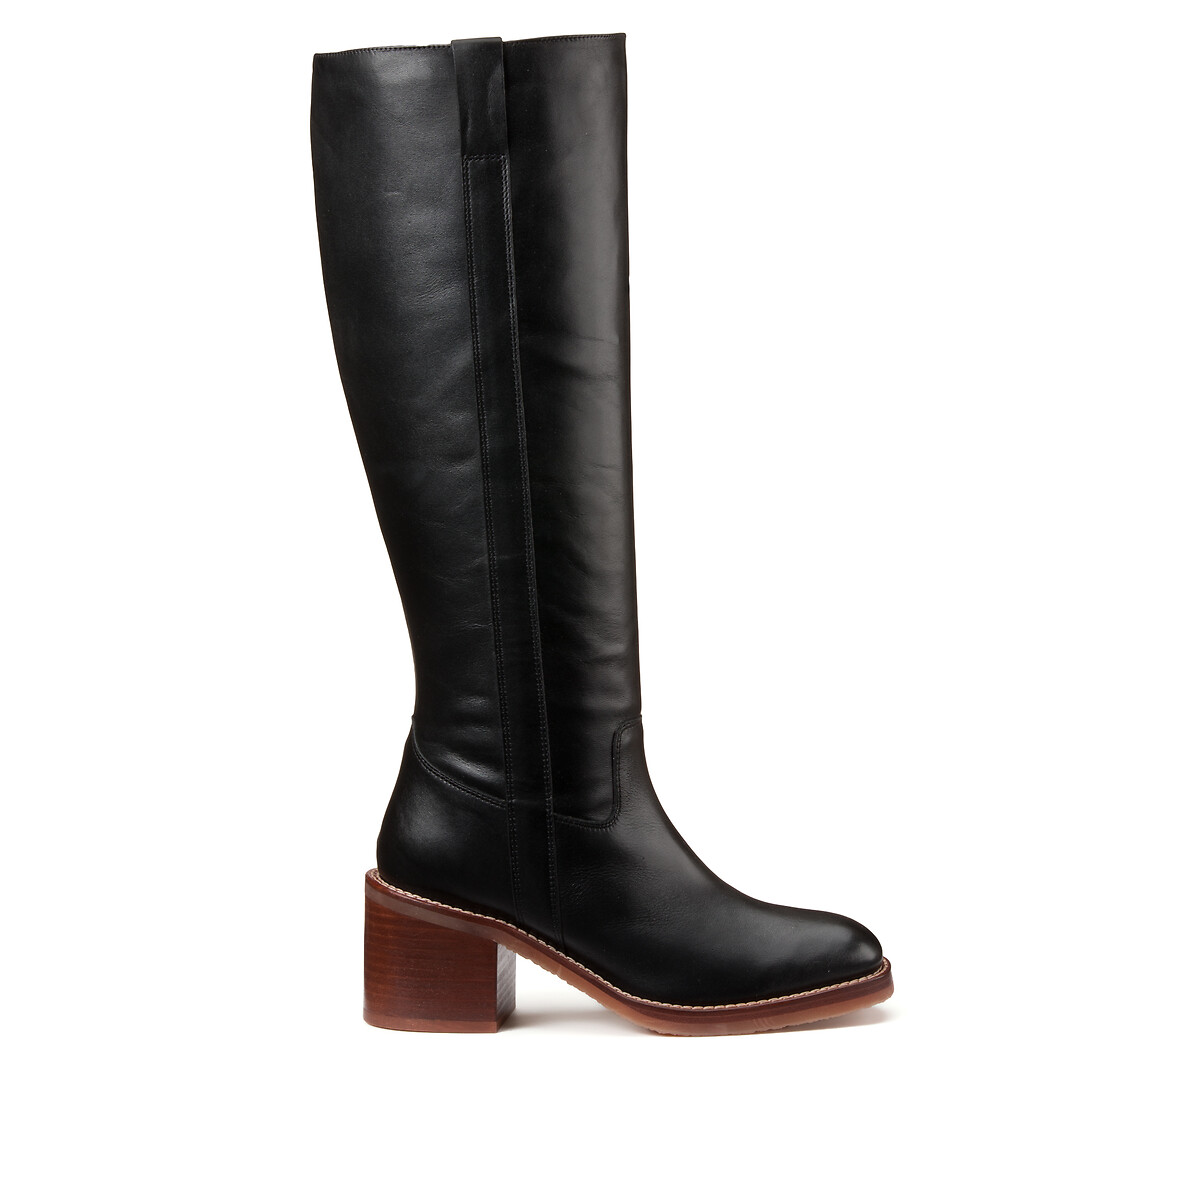 Leather Calf Boots with Block Heel